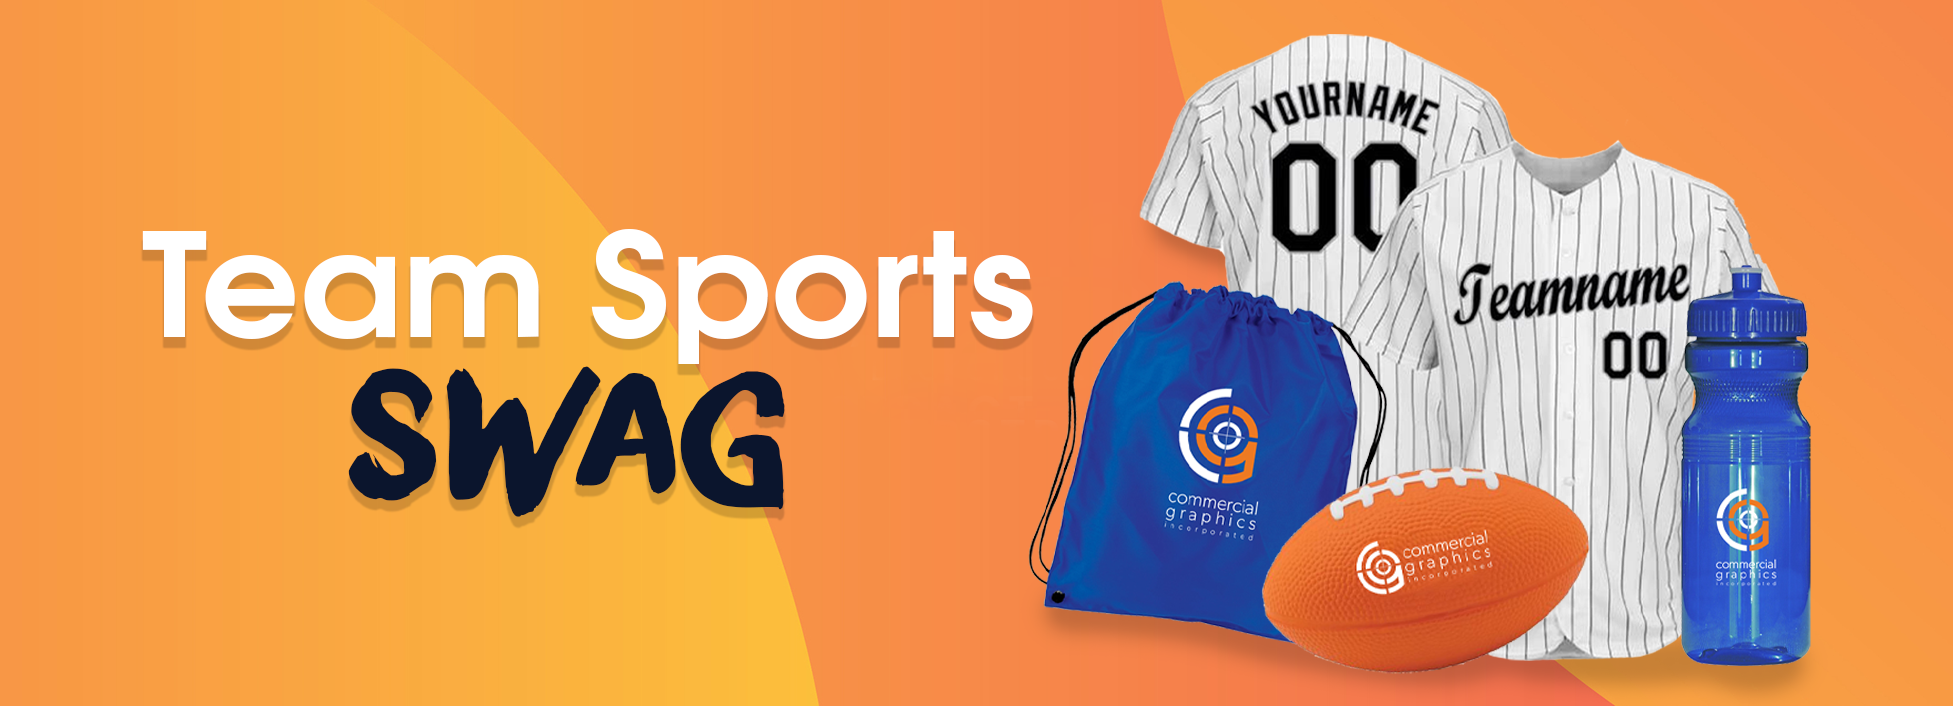 sports uniforms, drawstring bag, football and water bottle